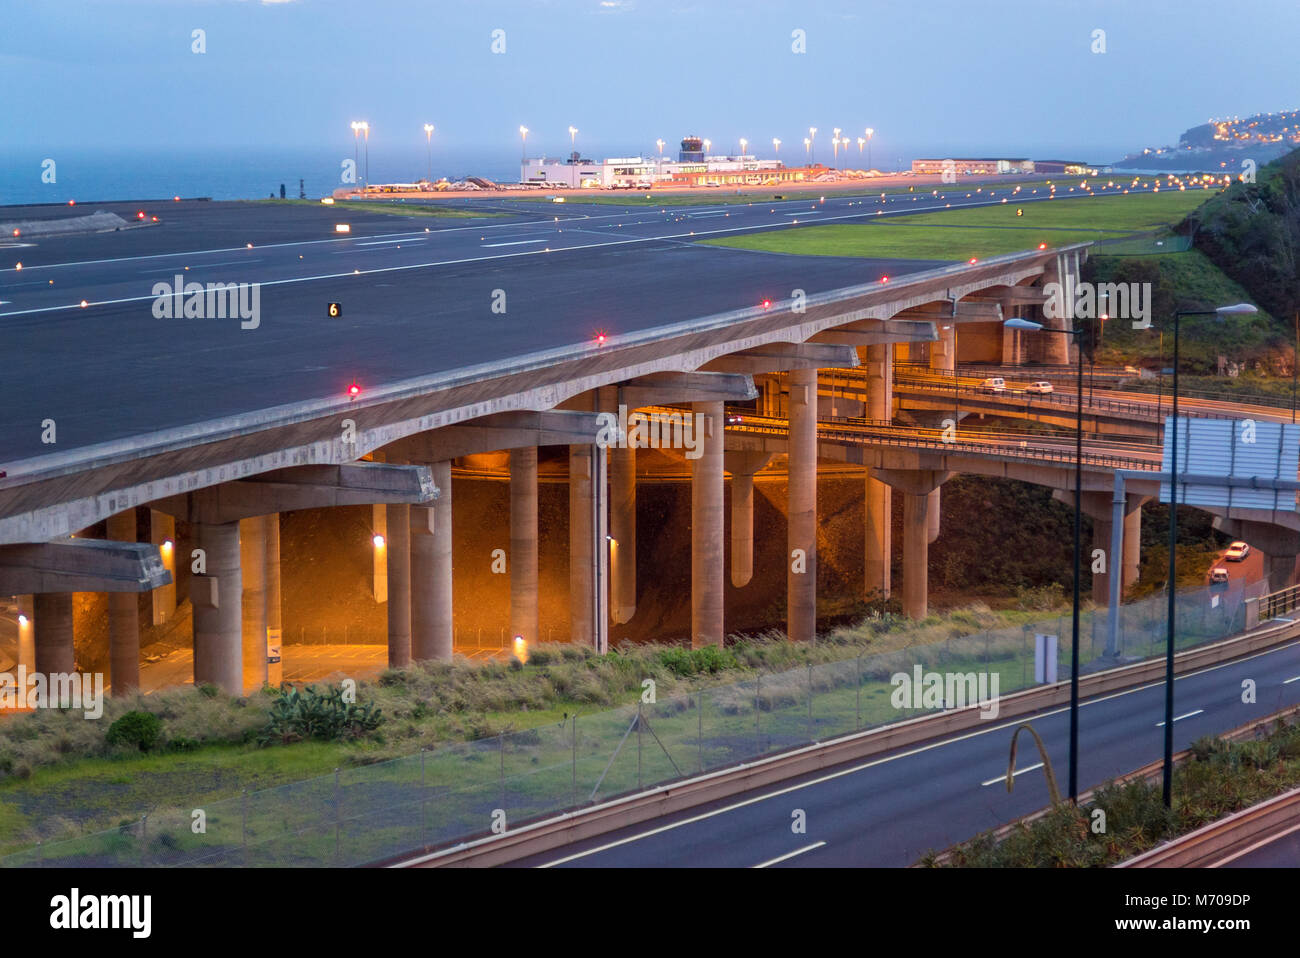 an evening overview of the extended runway at Funchal Cristiano Ronaldo International Airport, Madeira Stock Photo